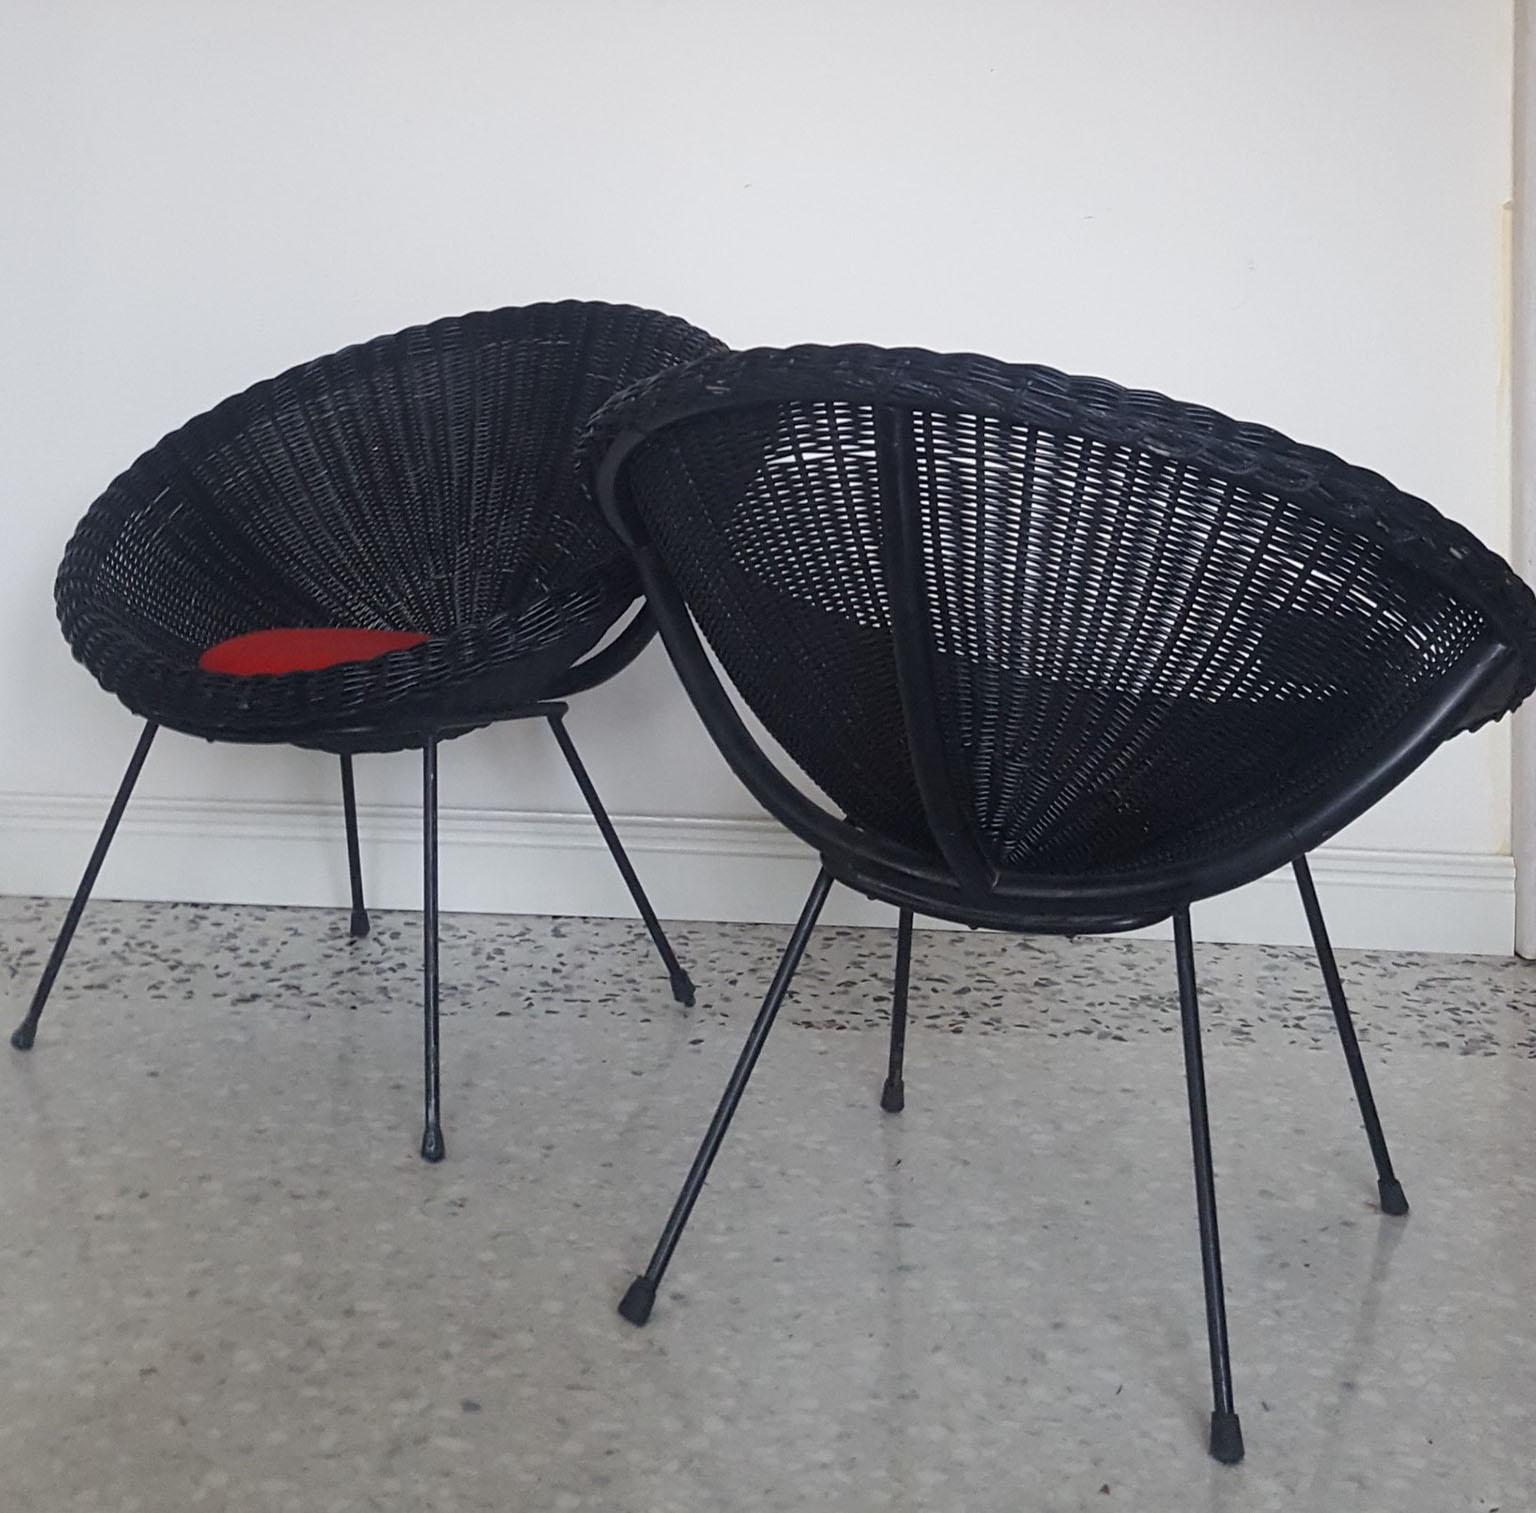 Iron Mid-Century Modern Italian Black Wicker Round Armchairs, Made in Milano, 1950s For Sale